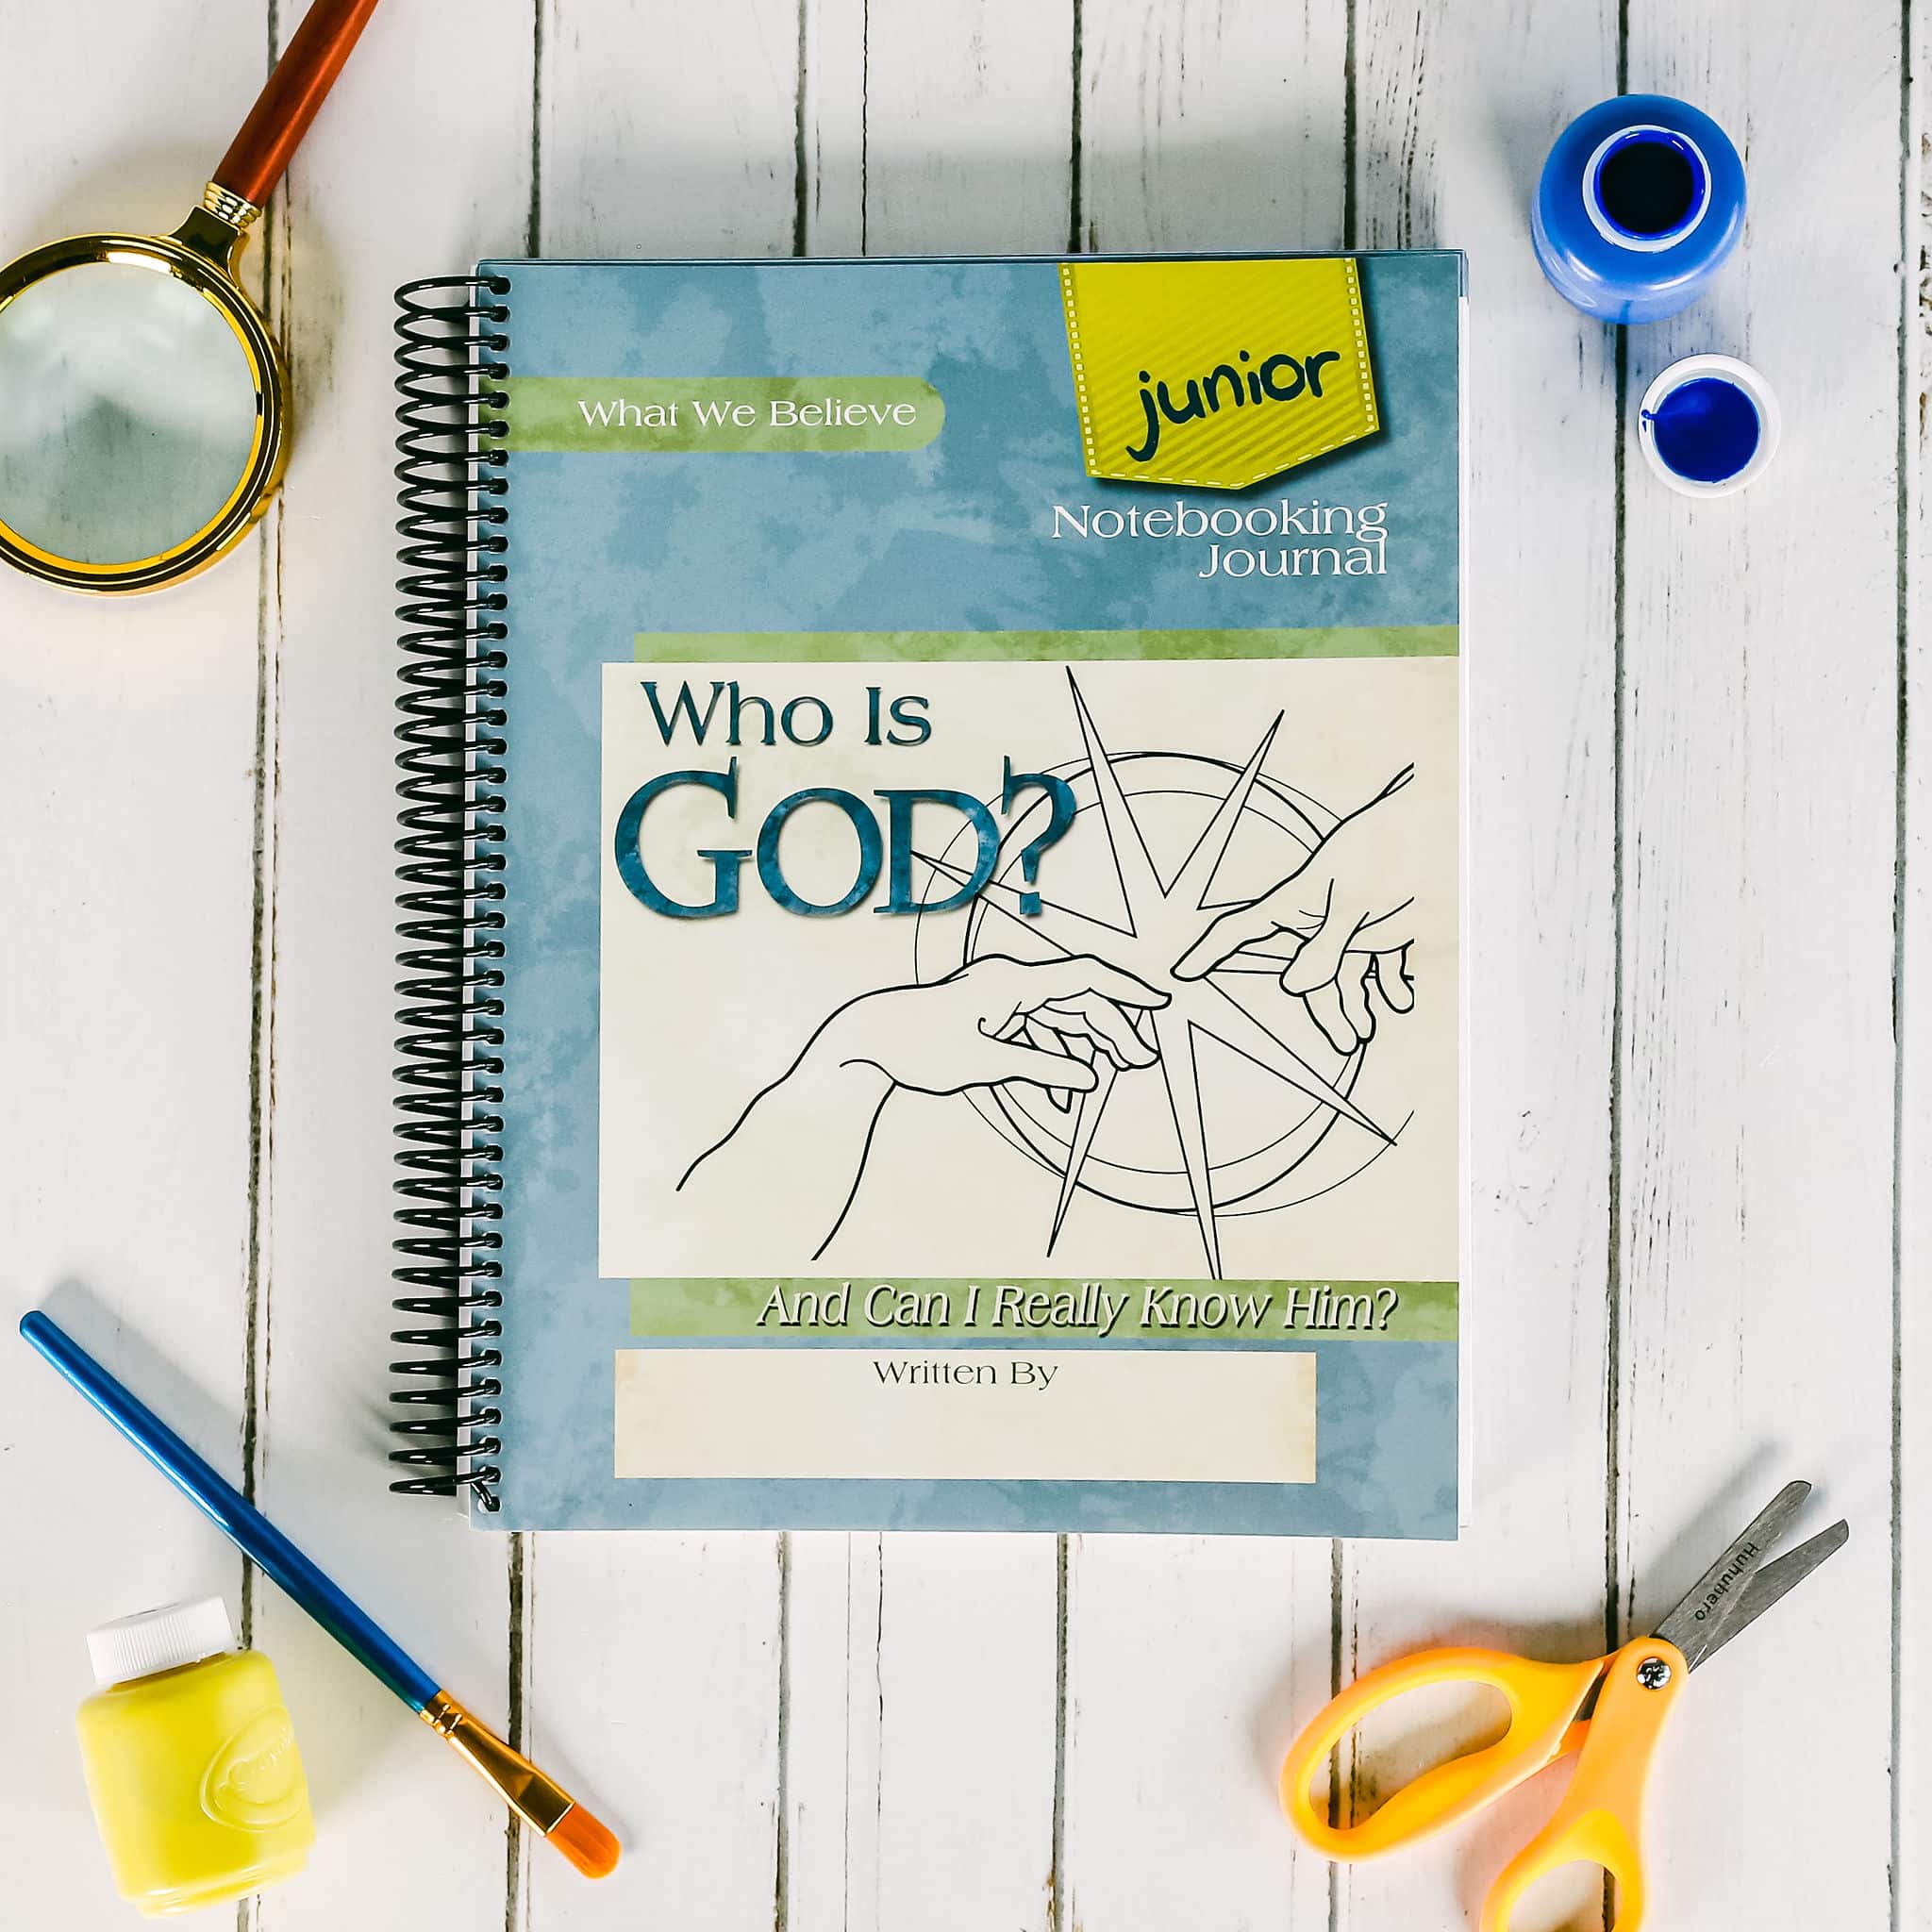 Who is God? Junior Notebooking Journal